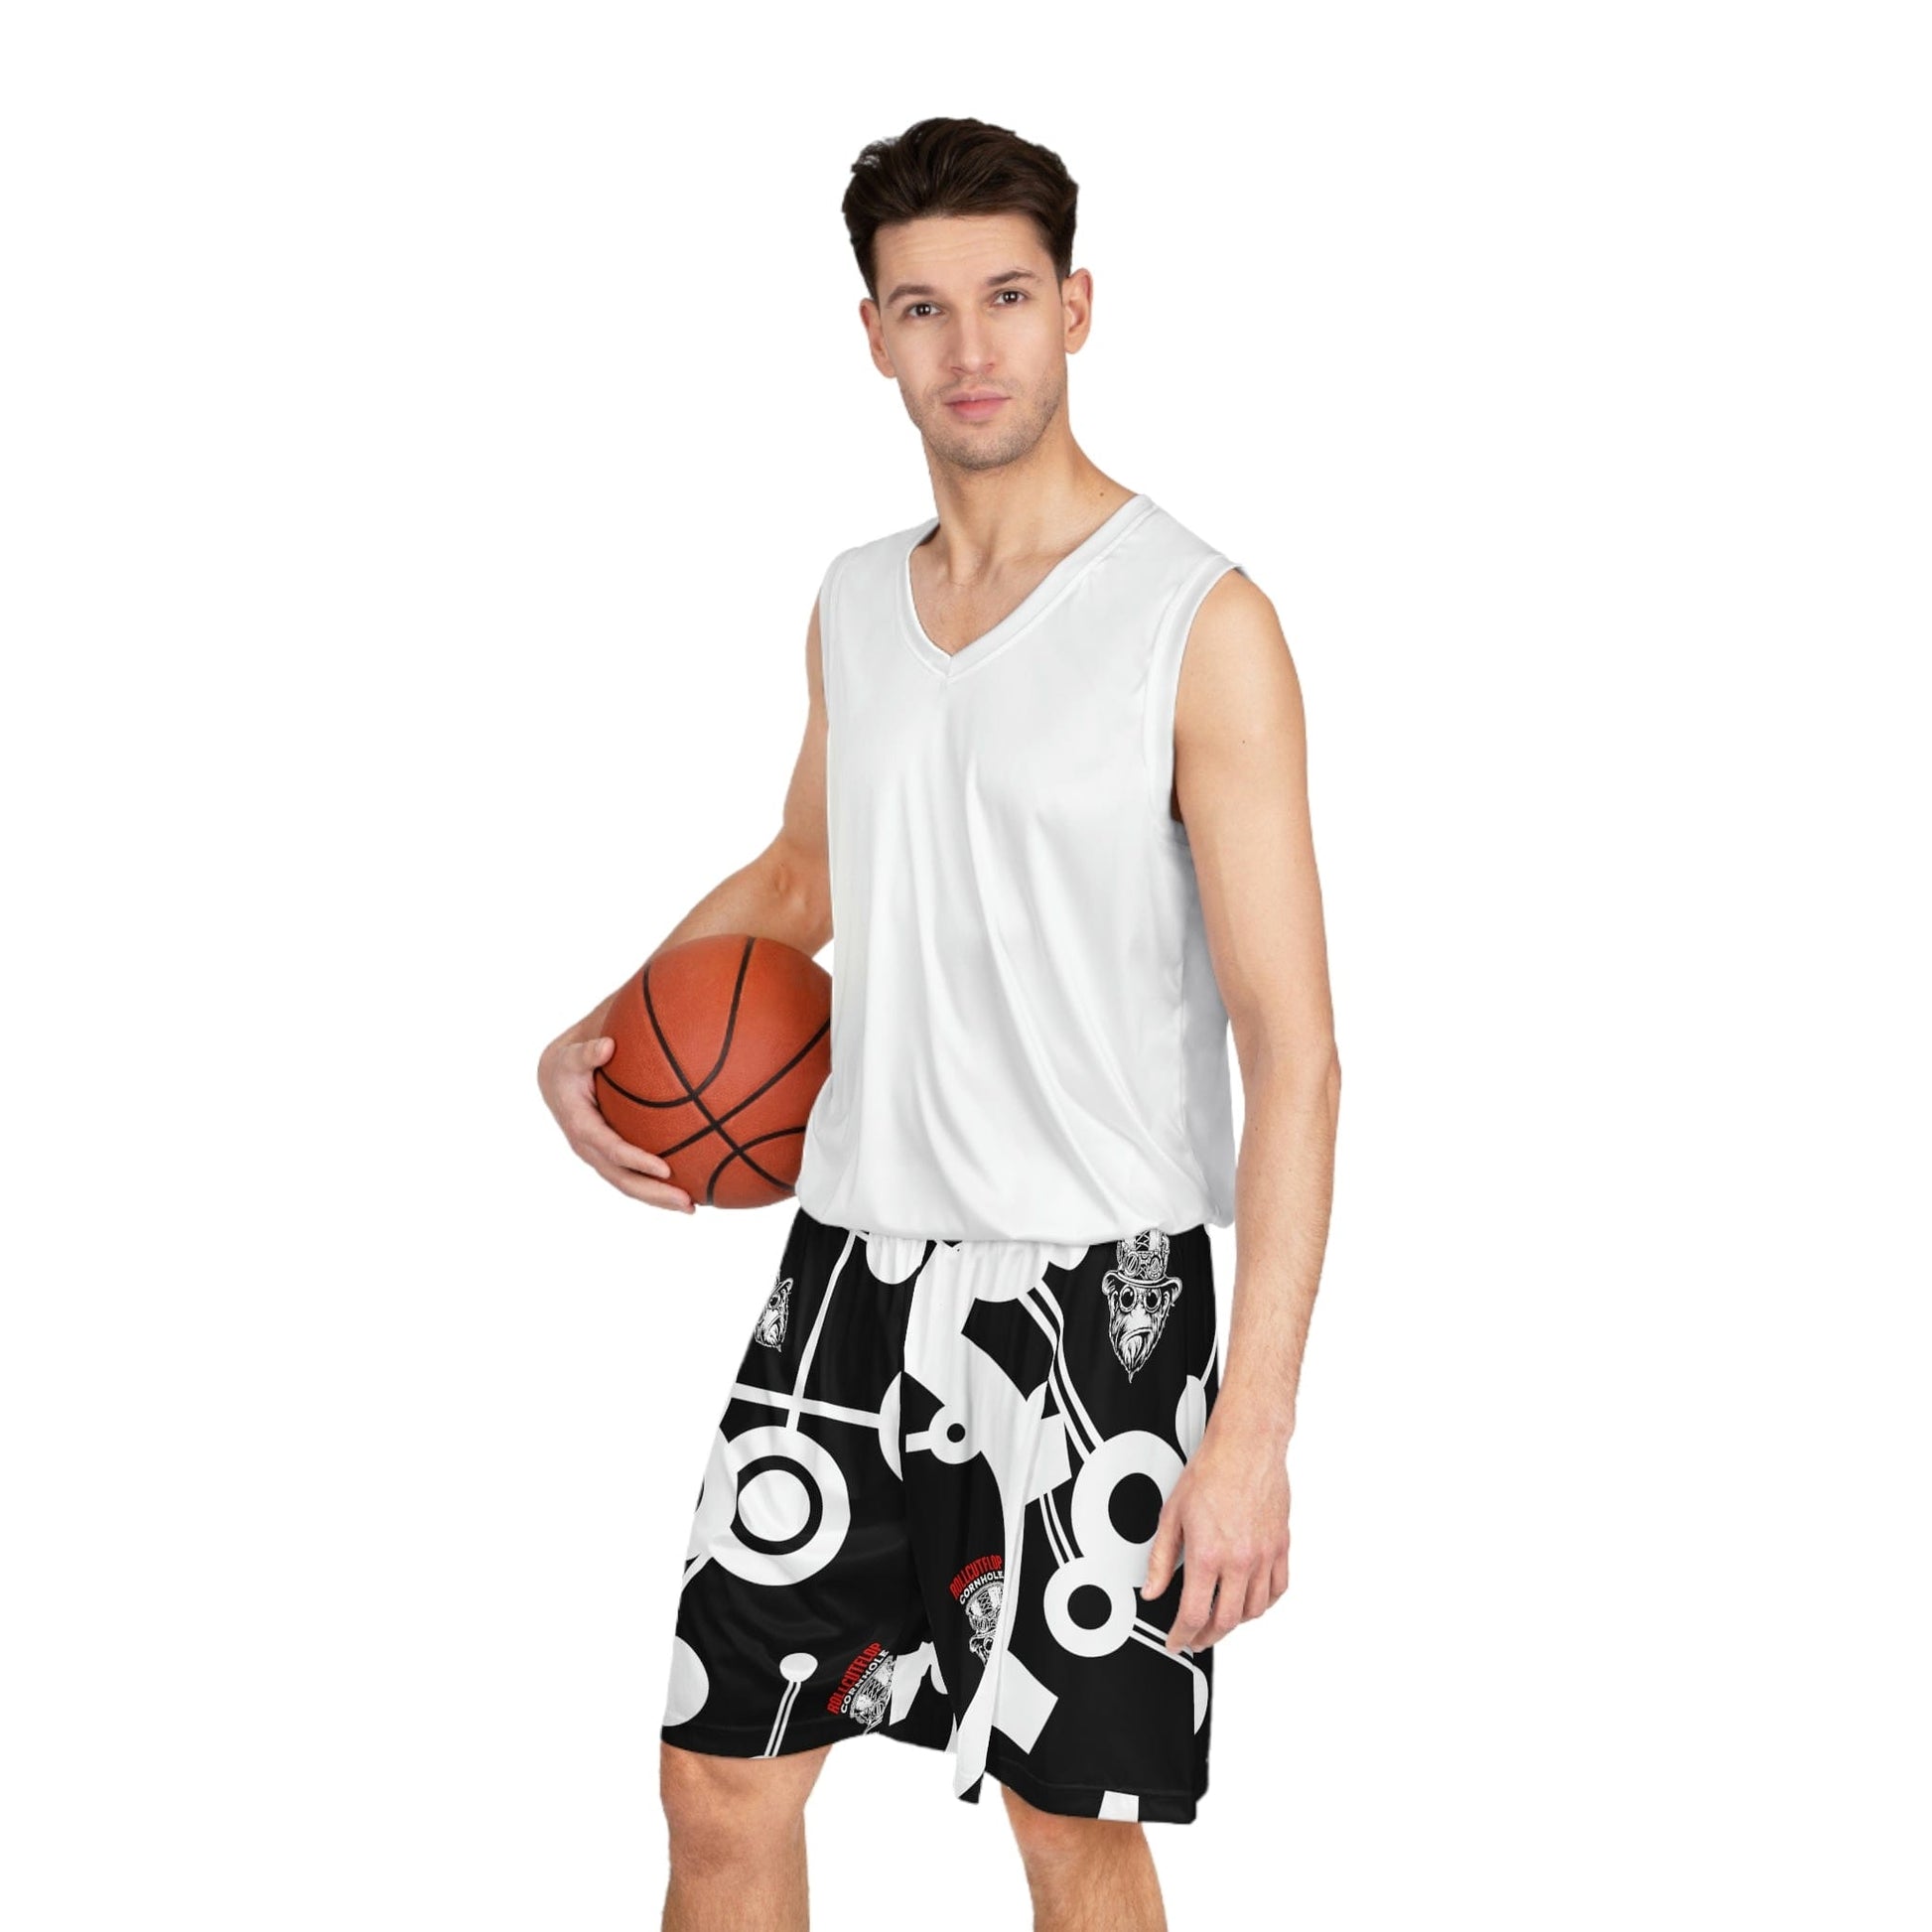 Roll Cut Flop™ All Over Print Black, Red & White Basketball Shorts - Steampunk Gorilla Logo with White Gear Print - Man wearing shorts (and white tank)